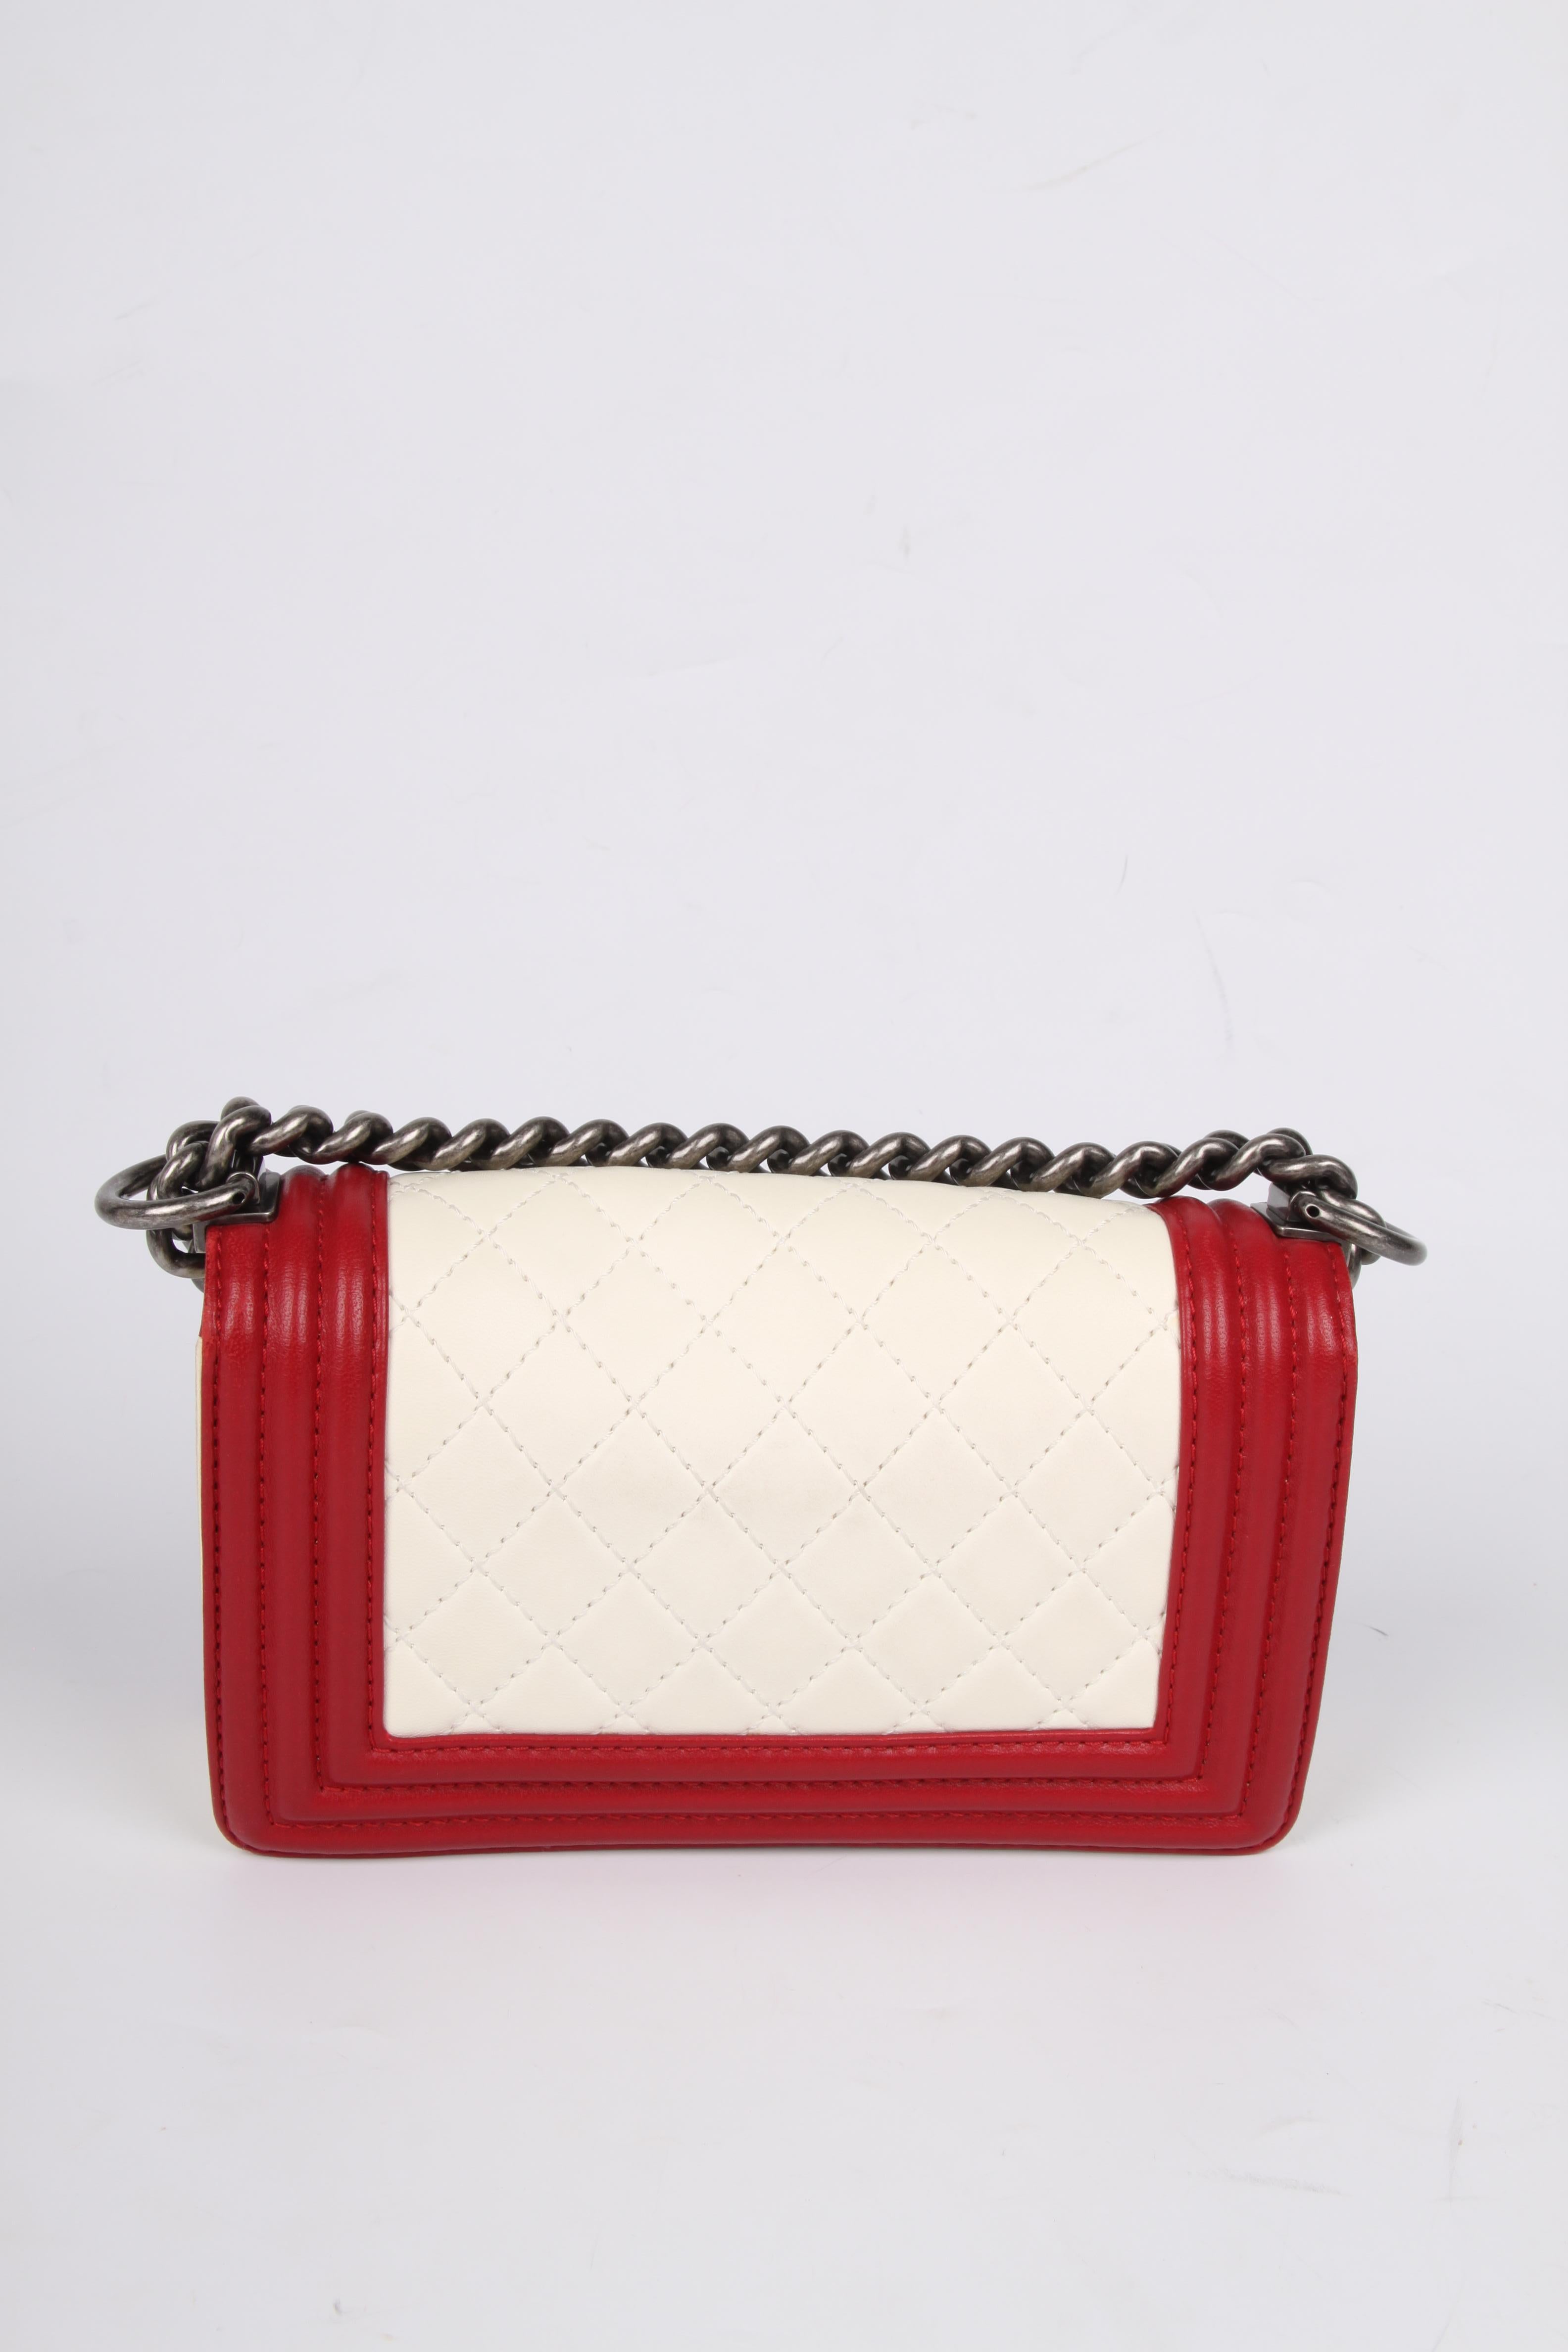 
The iconic CHANEL Boy Bag with a modern look, this one is a mini!

This red/white bag is from 2012/2013, in 2011 Karl Lagerfeld introduced the signature lock of this bag. An unique lock, you have to push it on both sides to open it. Karl says Coco